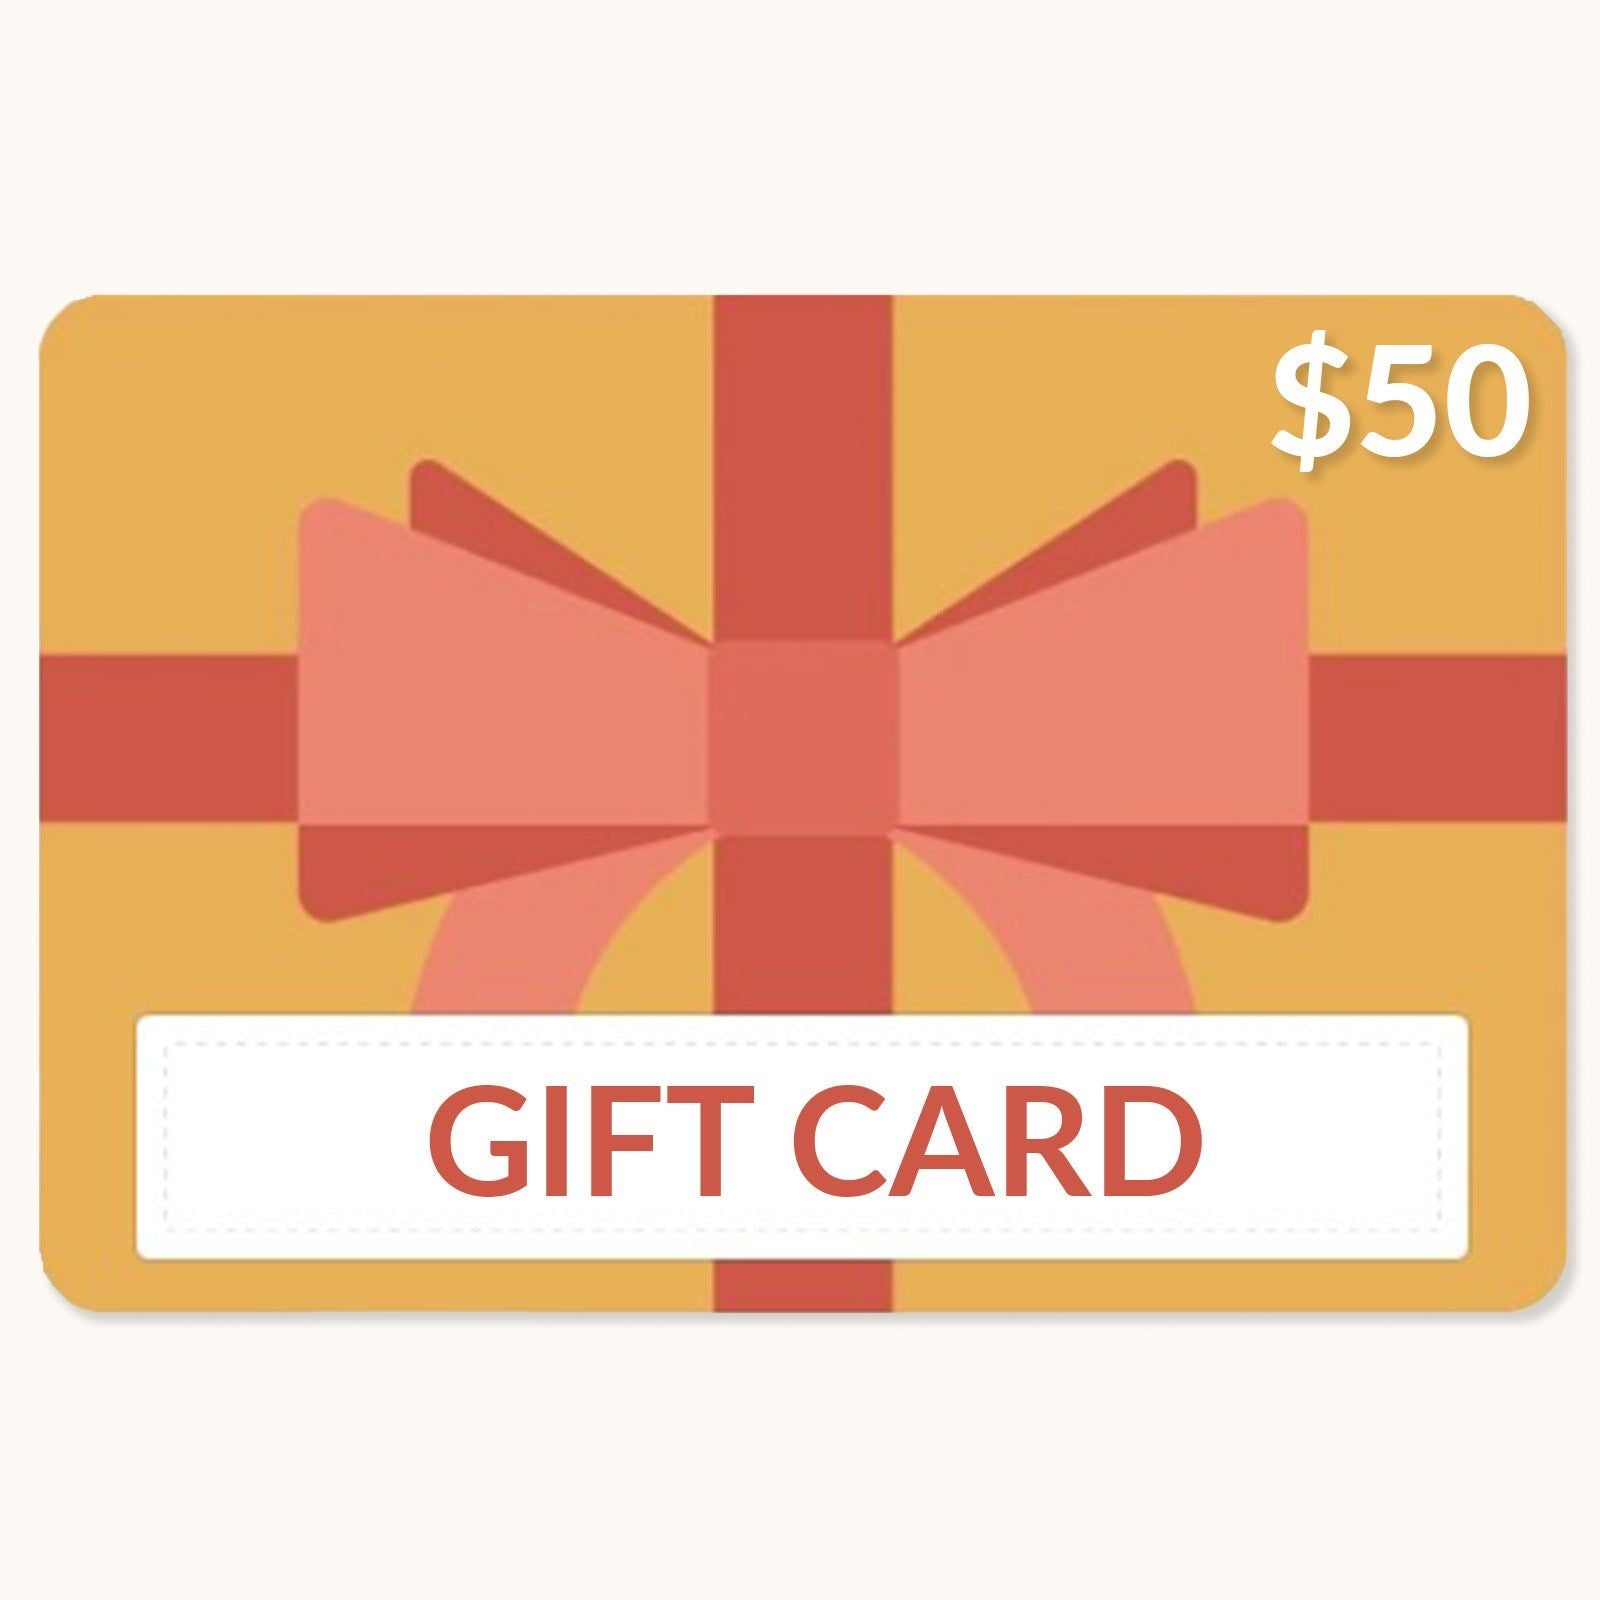 Work From Home Desks Gift Card 